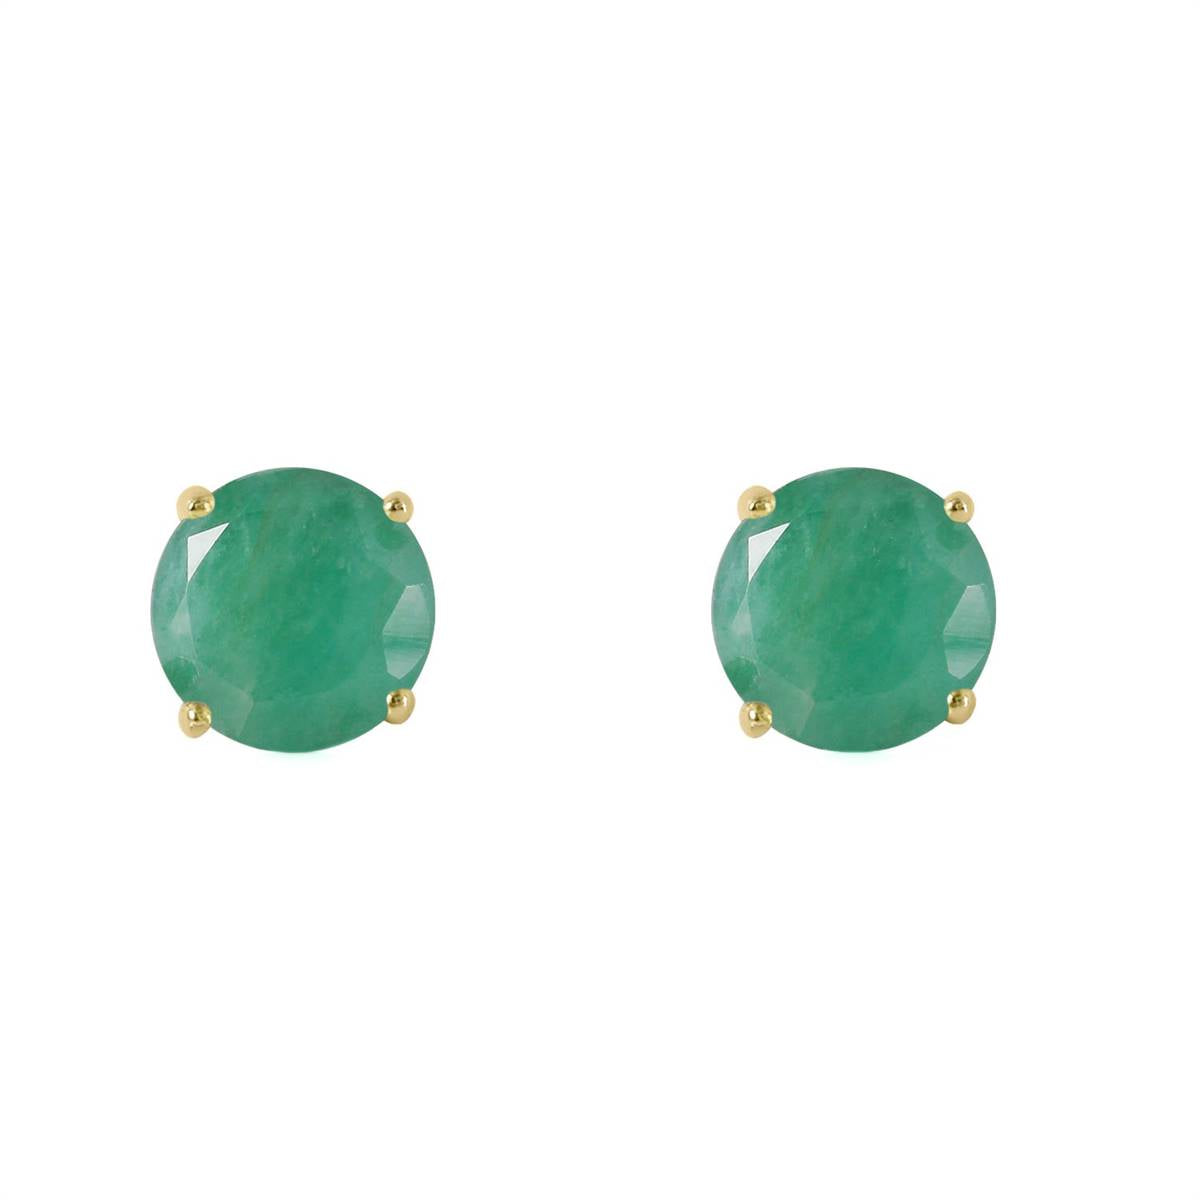 0.95 Carat 14K Solid Yellow Gold Spring Doesn't Fade Emerald Earrings